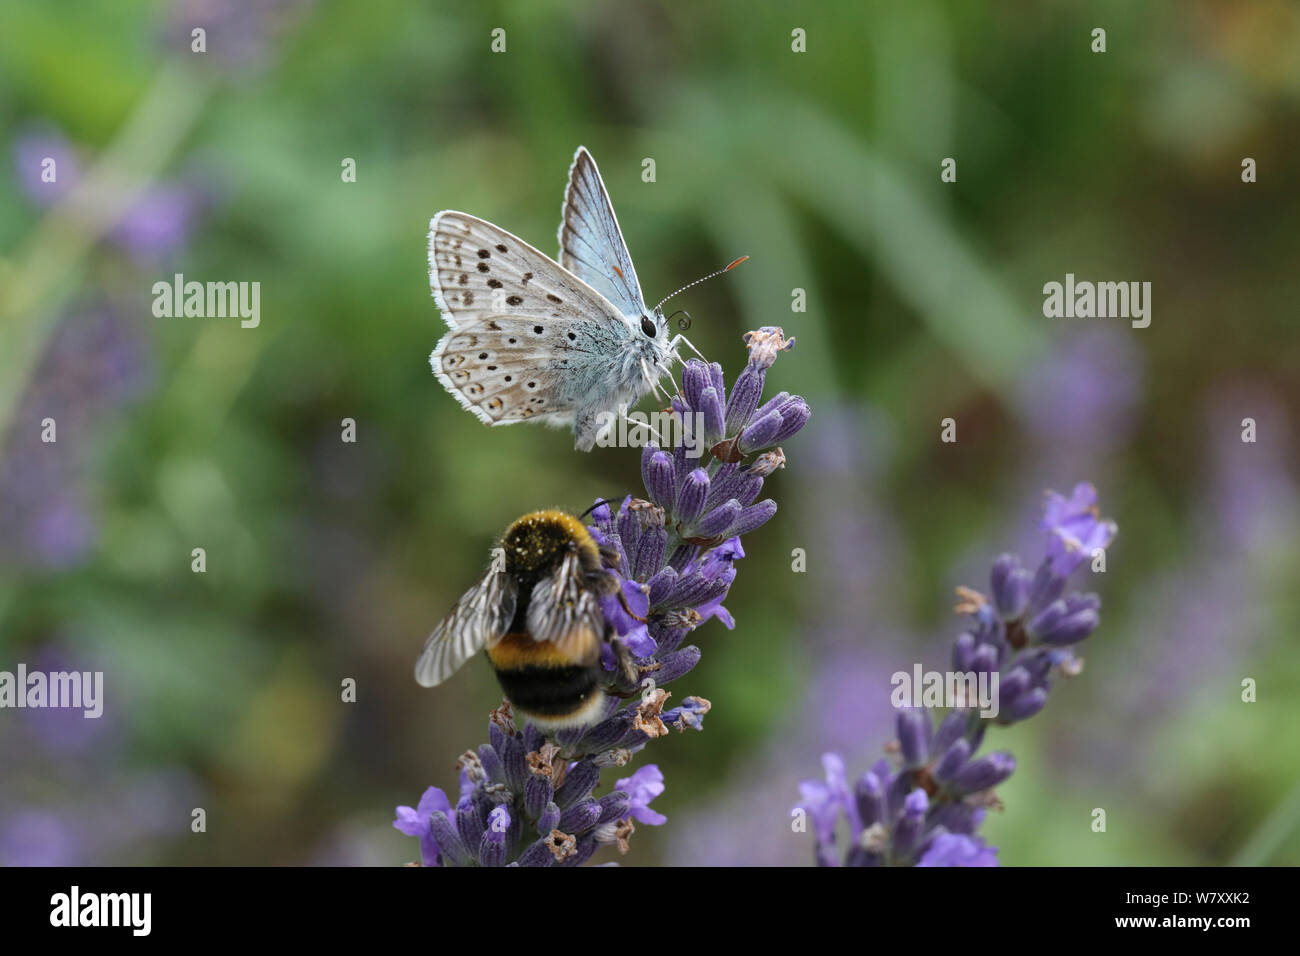 Chalk-hill blue butterfly (Lysandra coridon) and Bumblebee (Bombus sp) feeding on lavender flowers, Surrey, England, August. Stock Photo